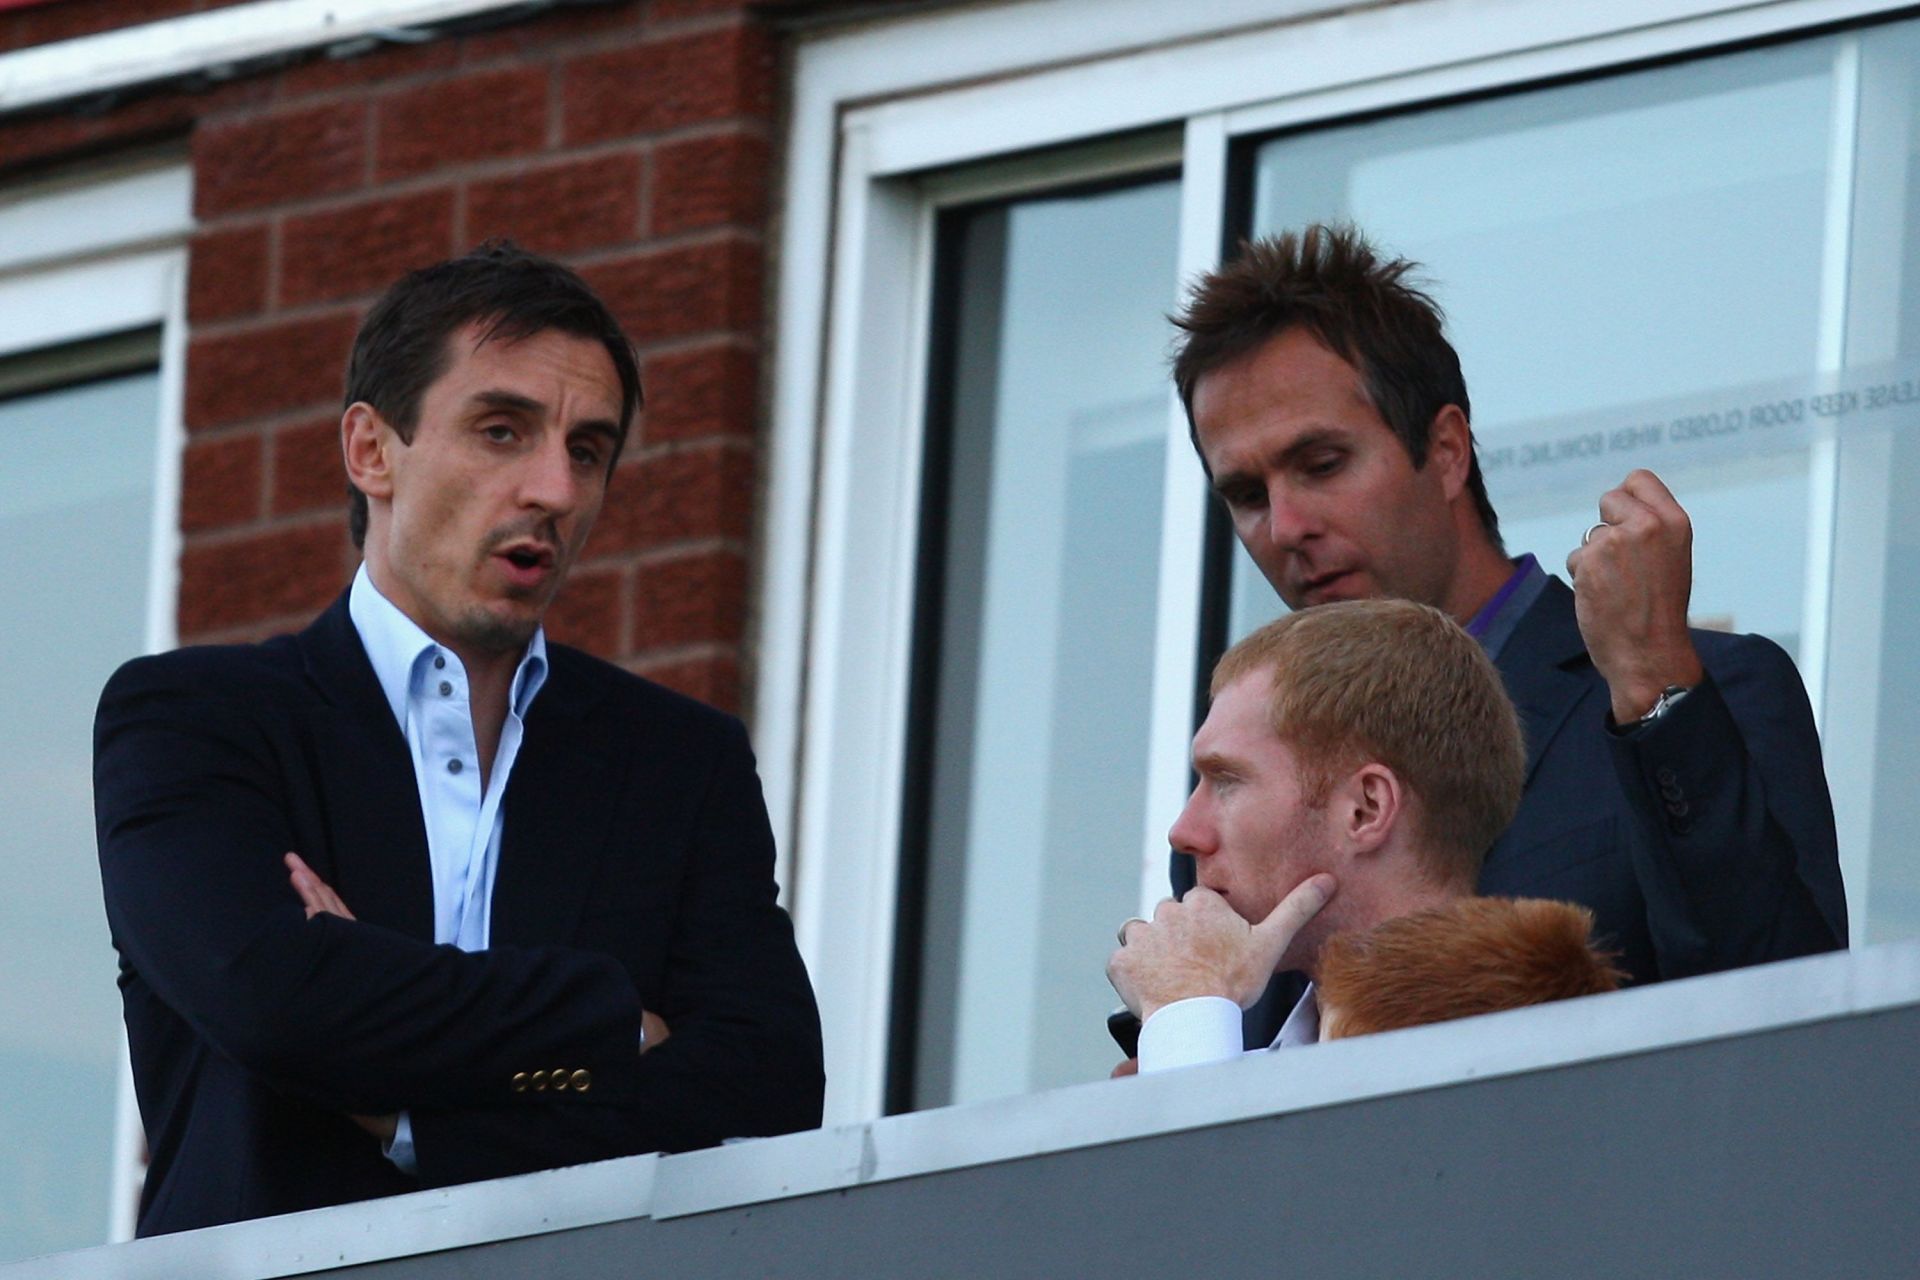 Gary Neville (left), Michael Vaughan (centre) and Paul Scholes (right) at a T20 international between England and Australia